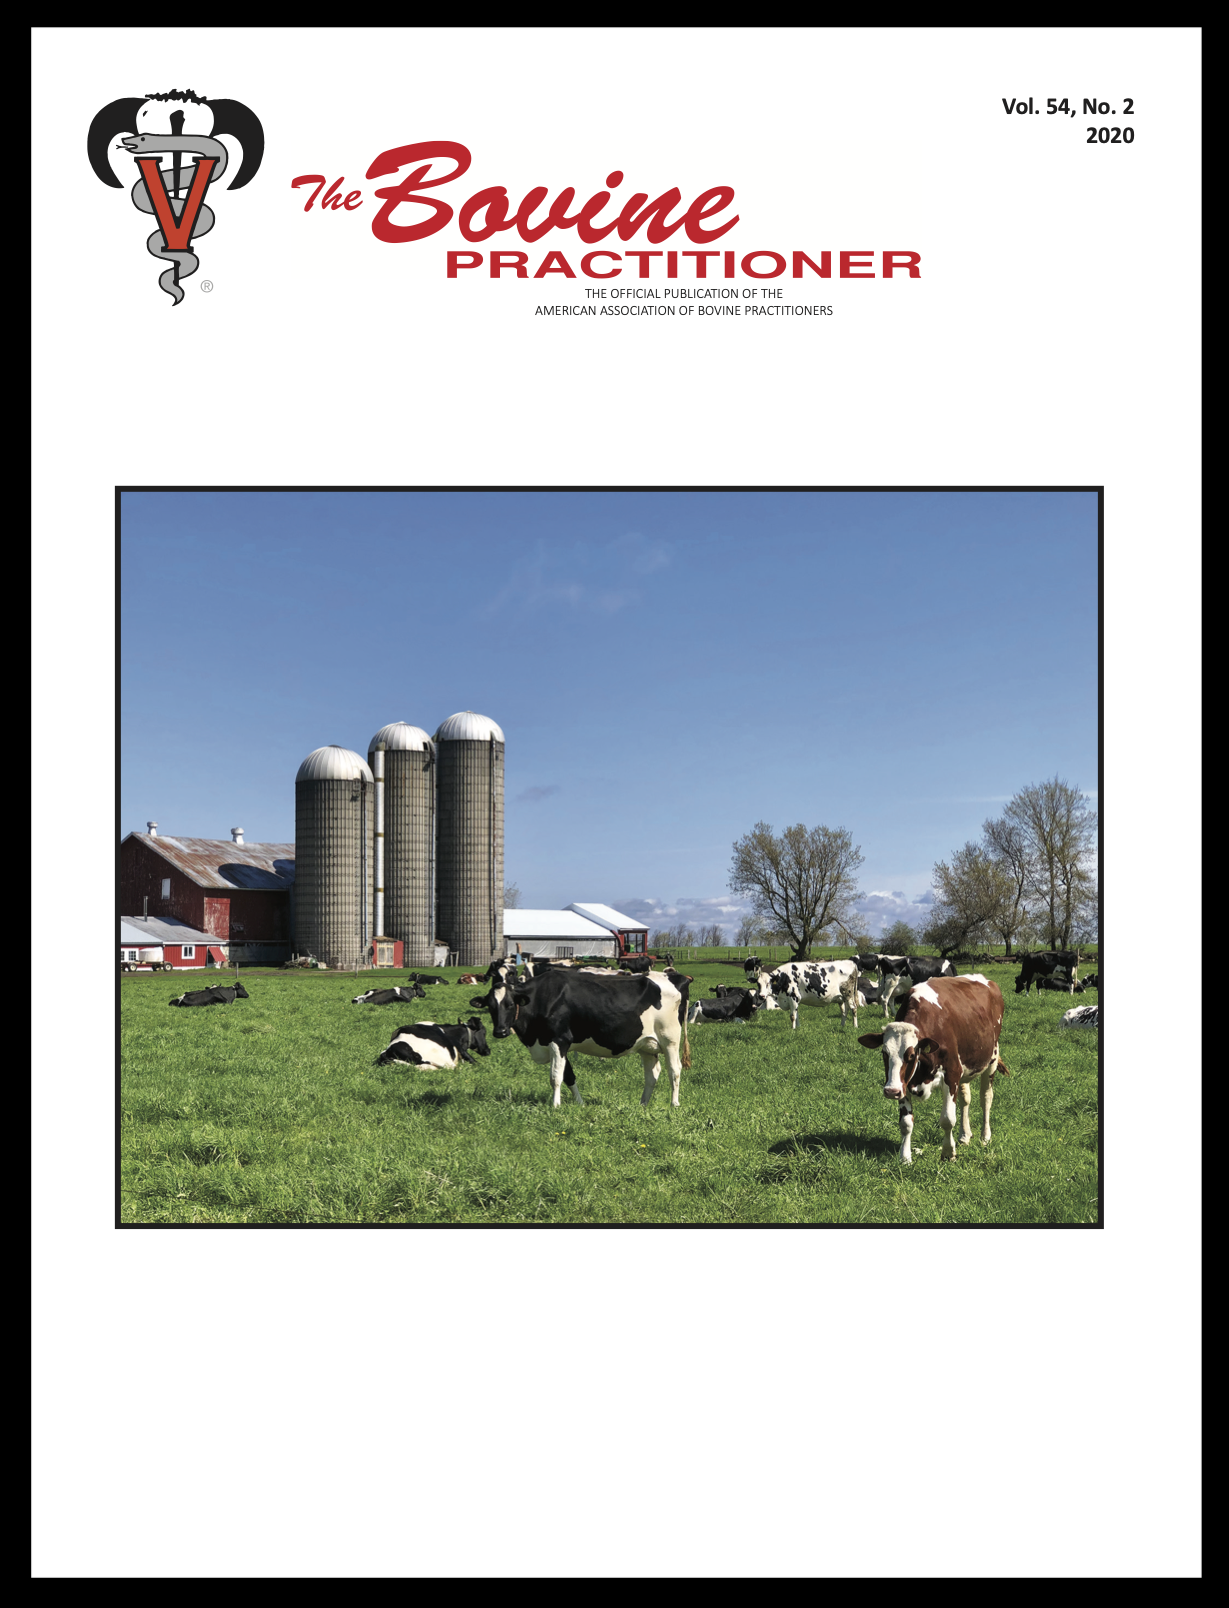 Cover image of Volume 54, No. 2 of the Bovine Practitioner: a photo of black and white and red holsteins in a green field with grain silos and a large barn in the background.